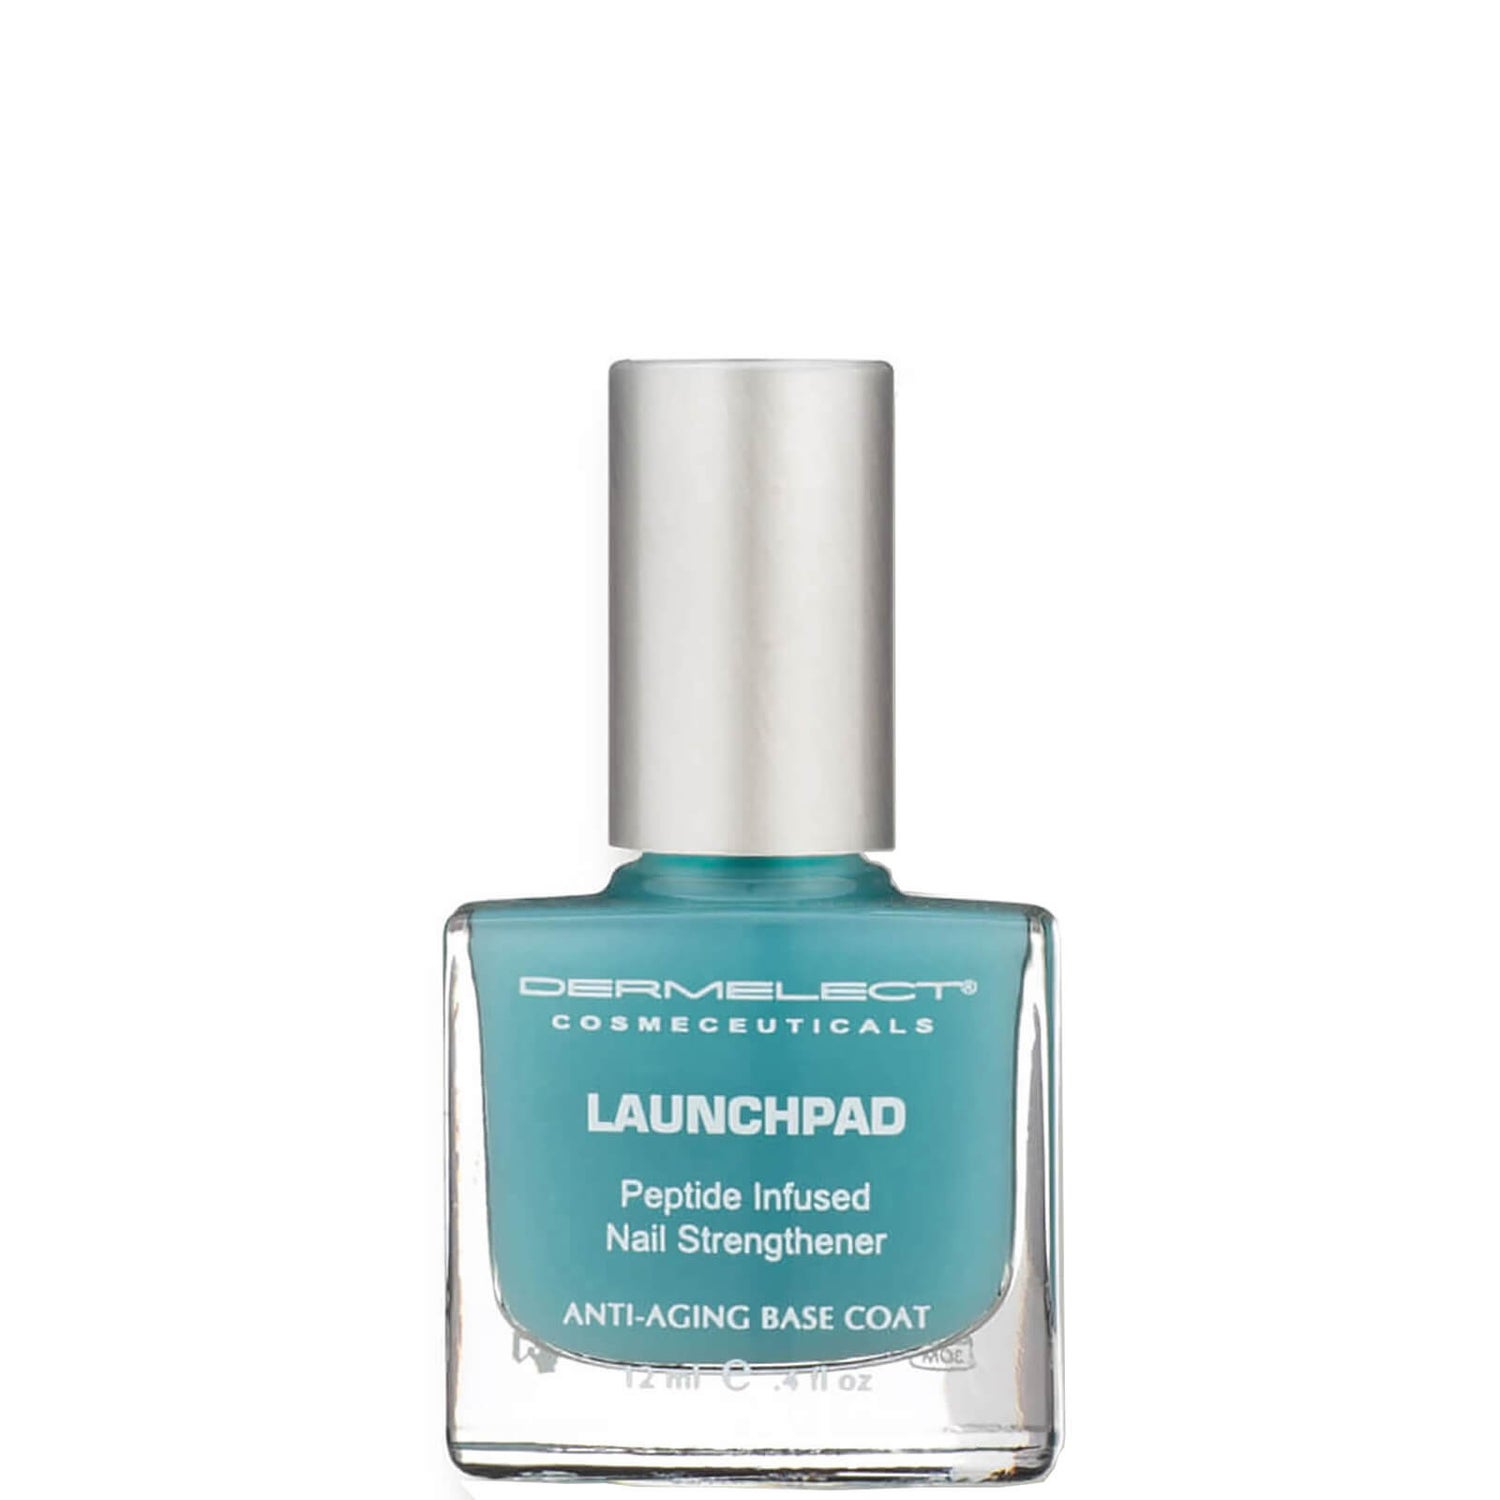 Dermelect Cosmeceuticals Launchpad Nail Strengthener (0.4 fl. oz.)